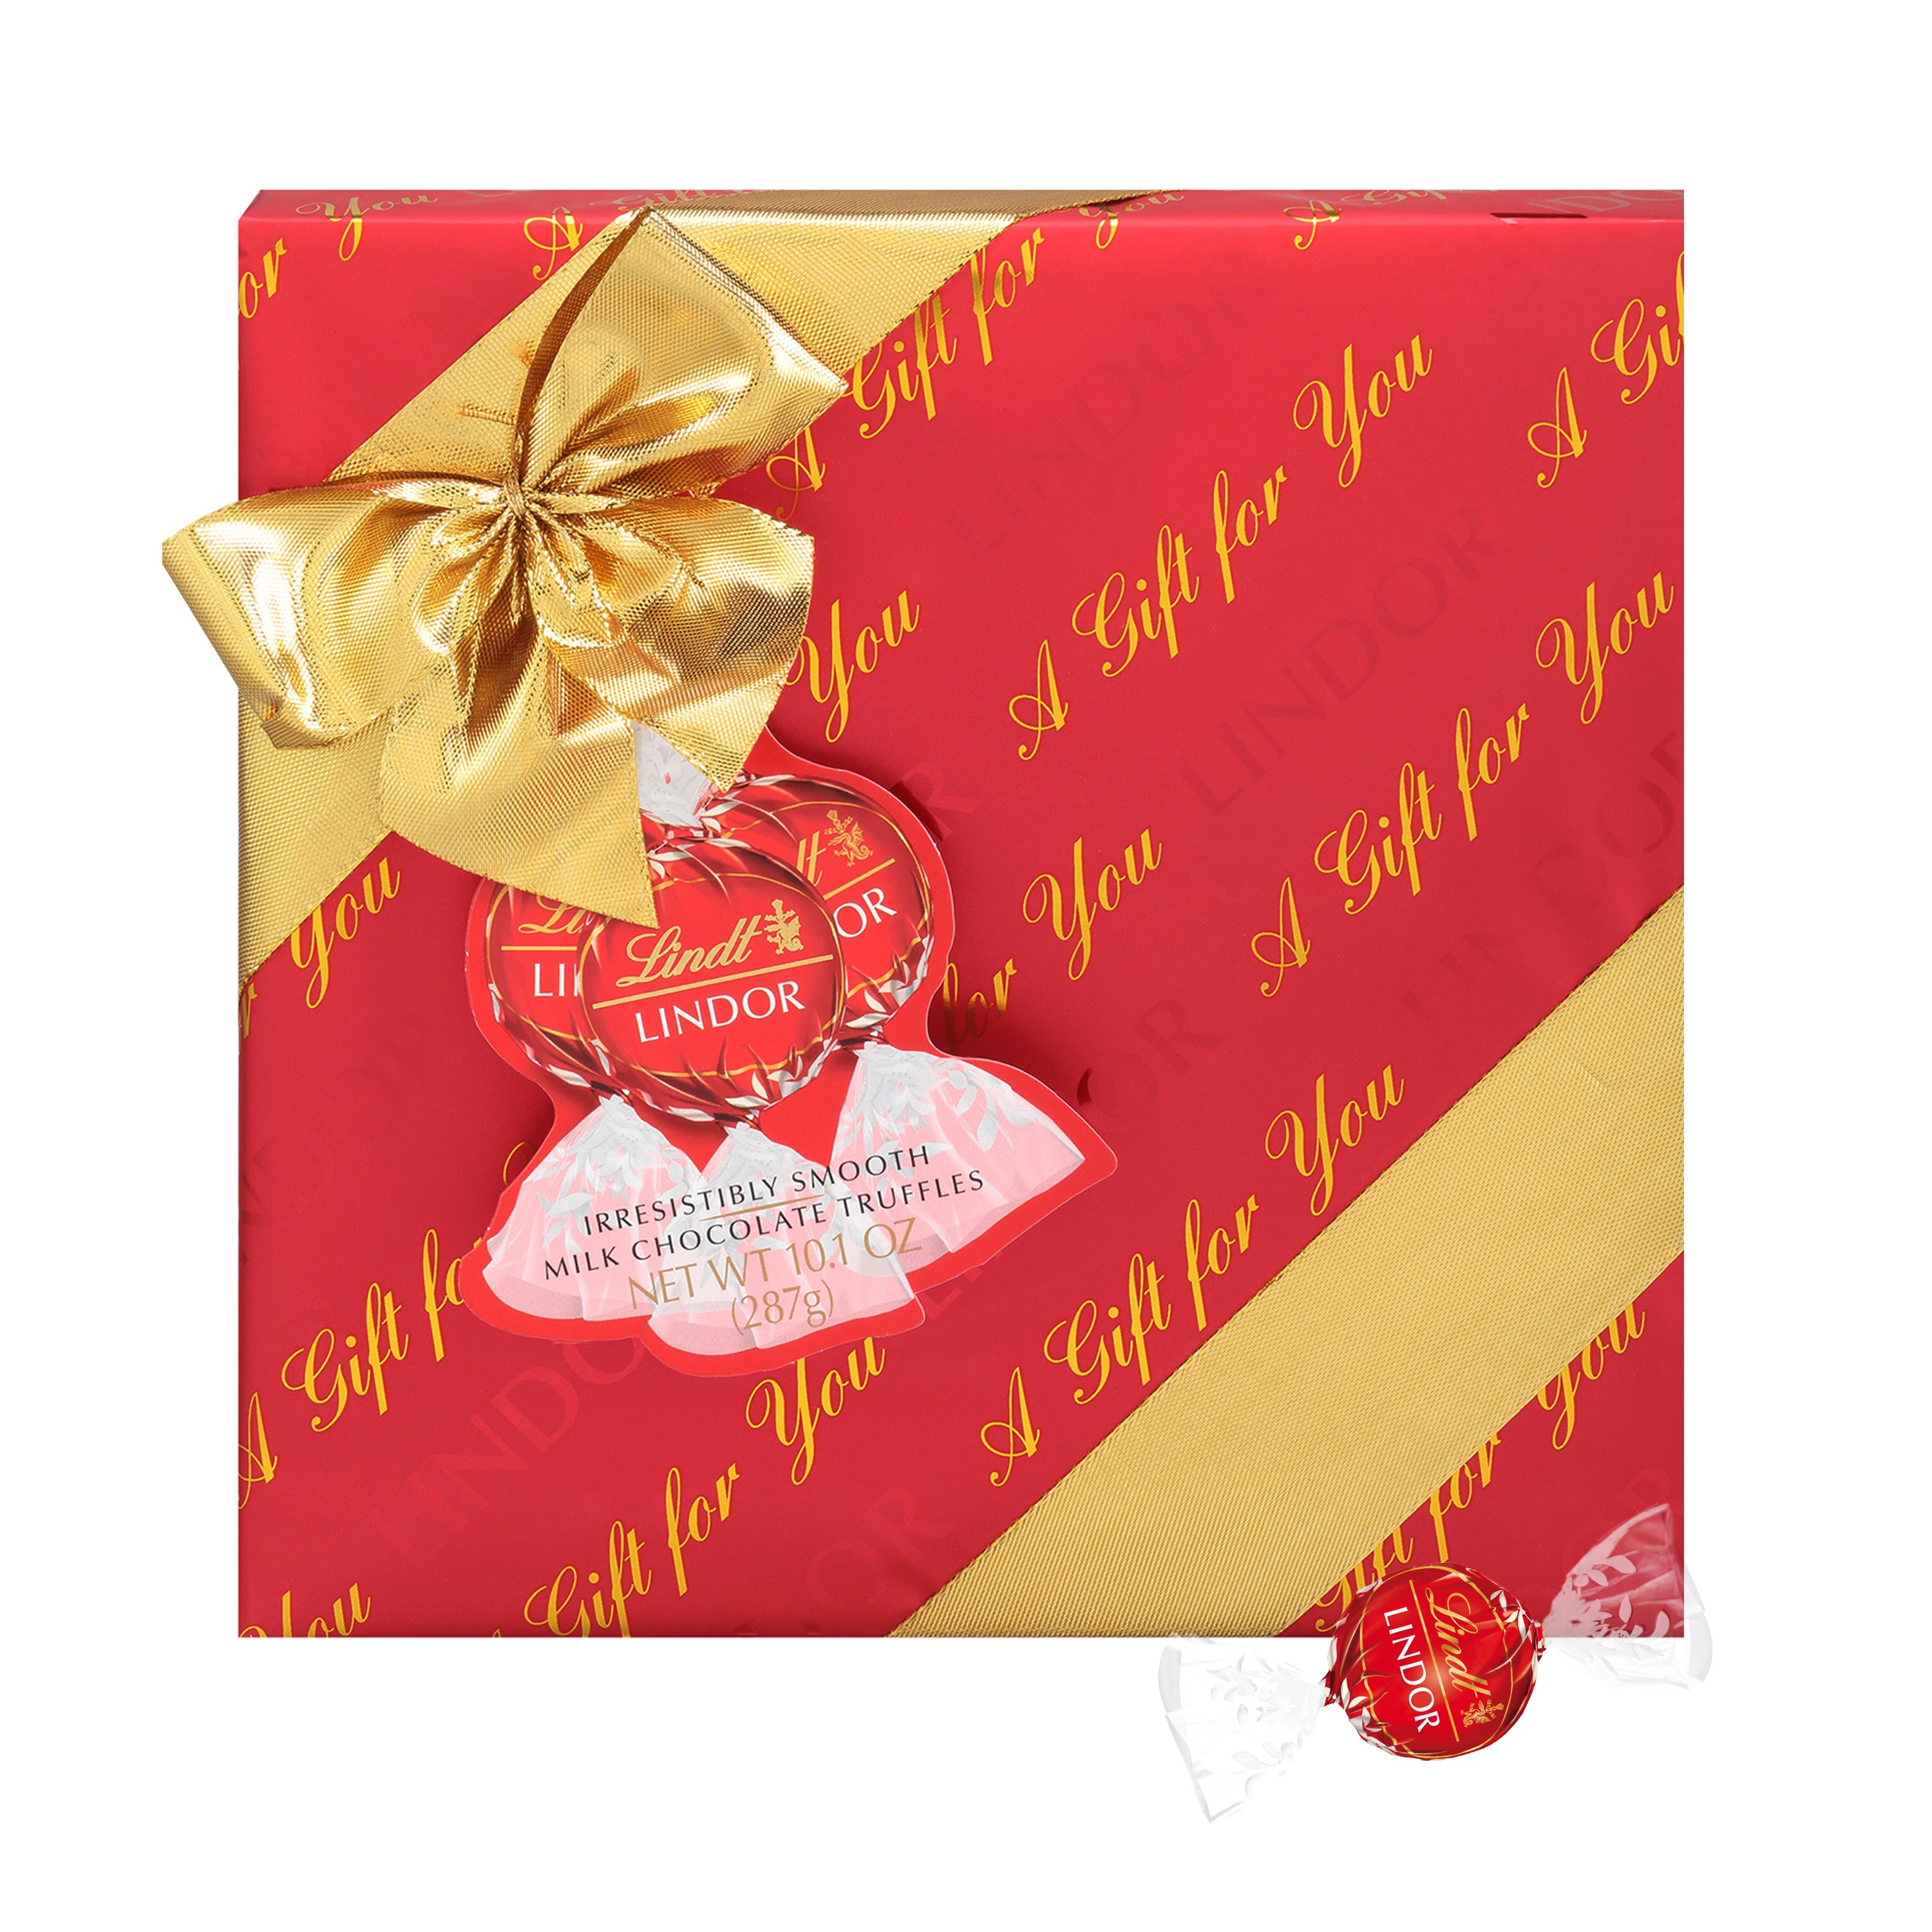 Lindt LINDOR Holiday Milk Chocolate Truffles Wrapped Gift Box, 10.1 oz.